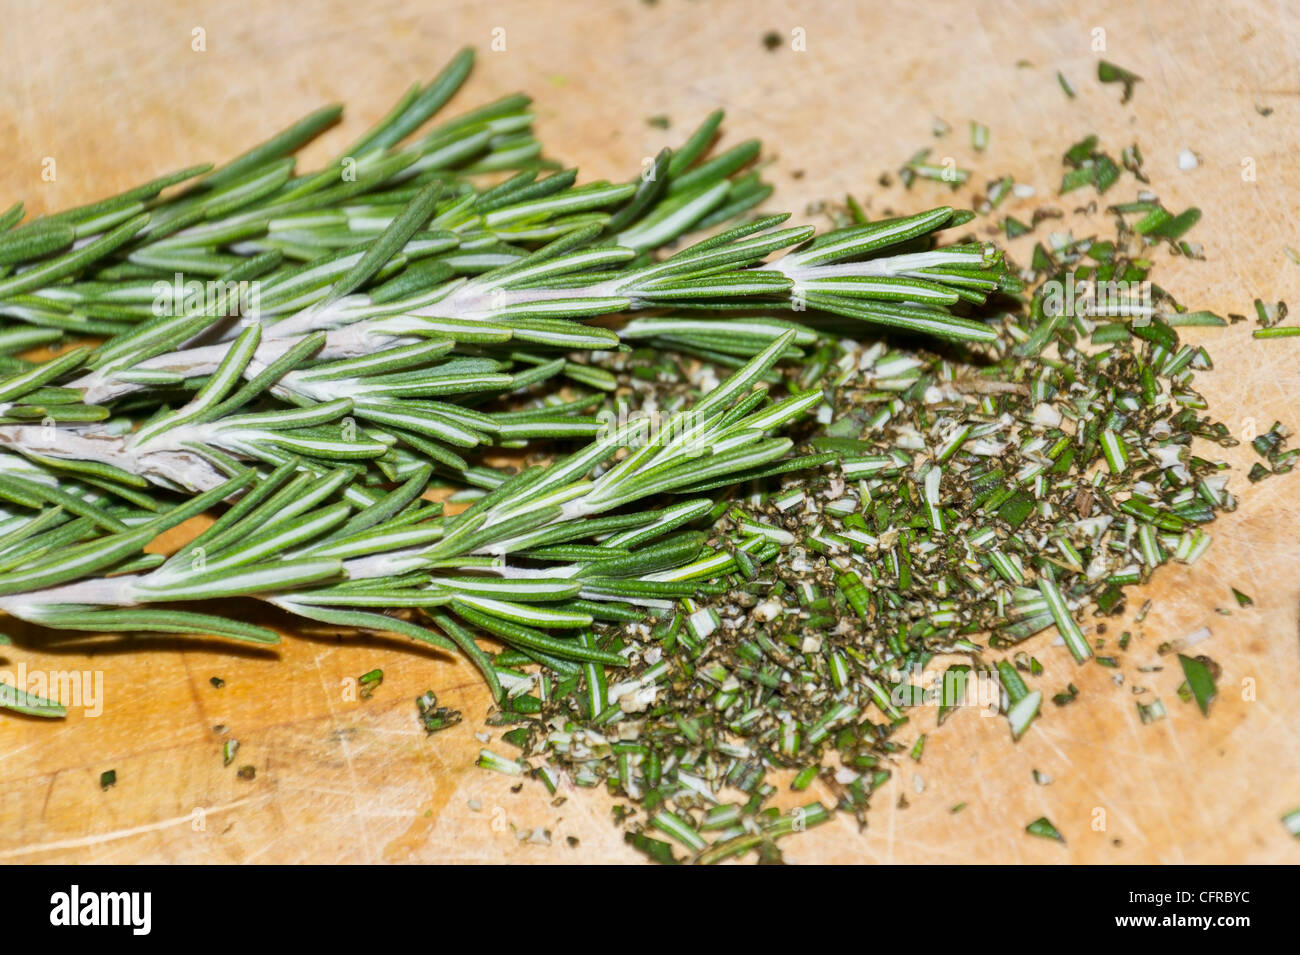 Freshly chopped sprig of rosemary herb (Rosmarinus officinalis) on a wooden cutting board. Stock Photo